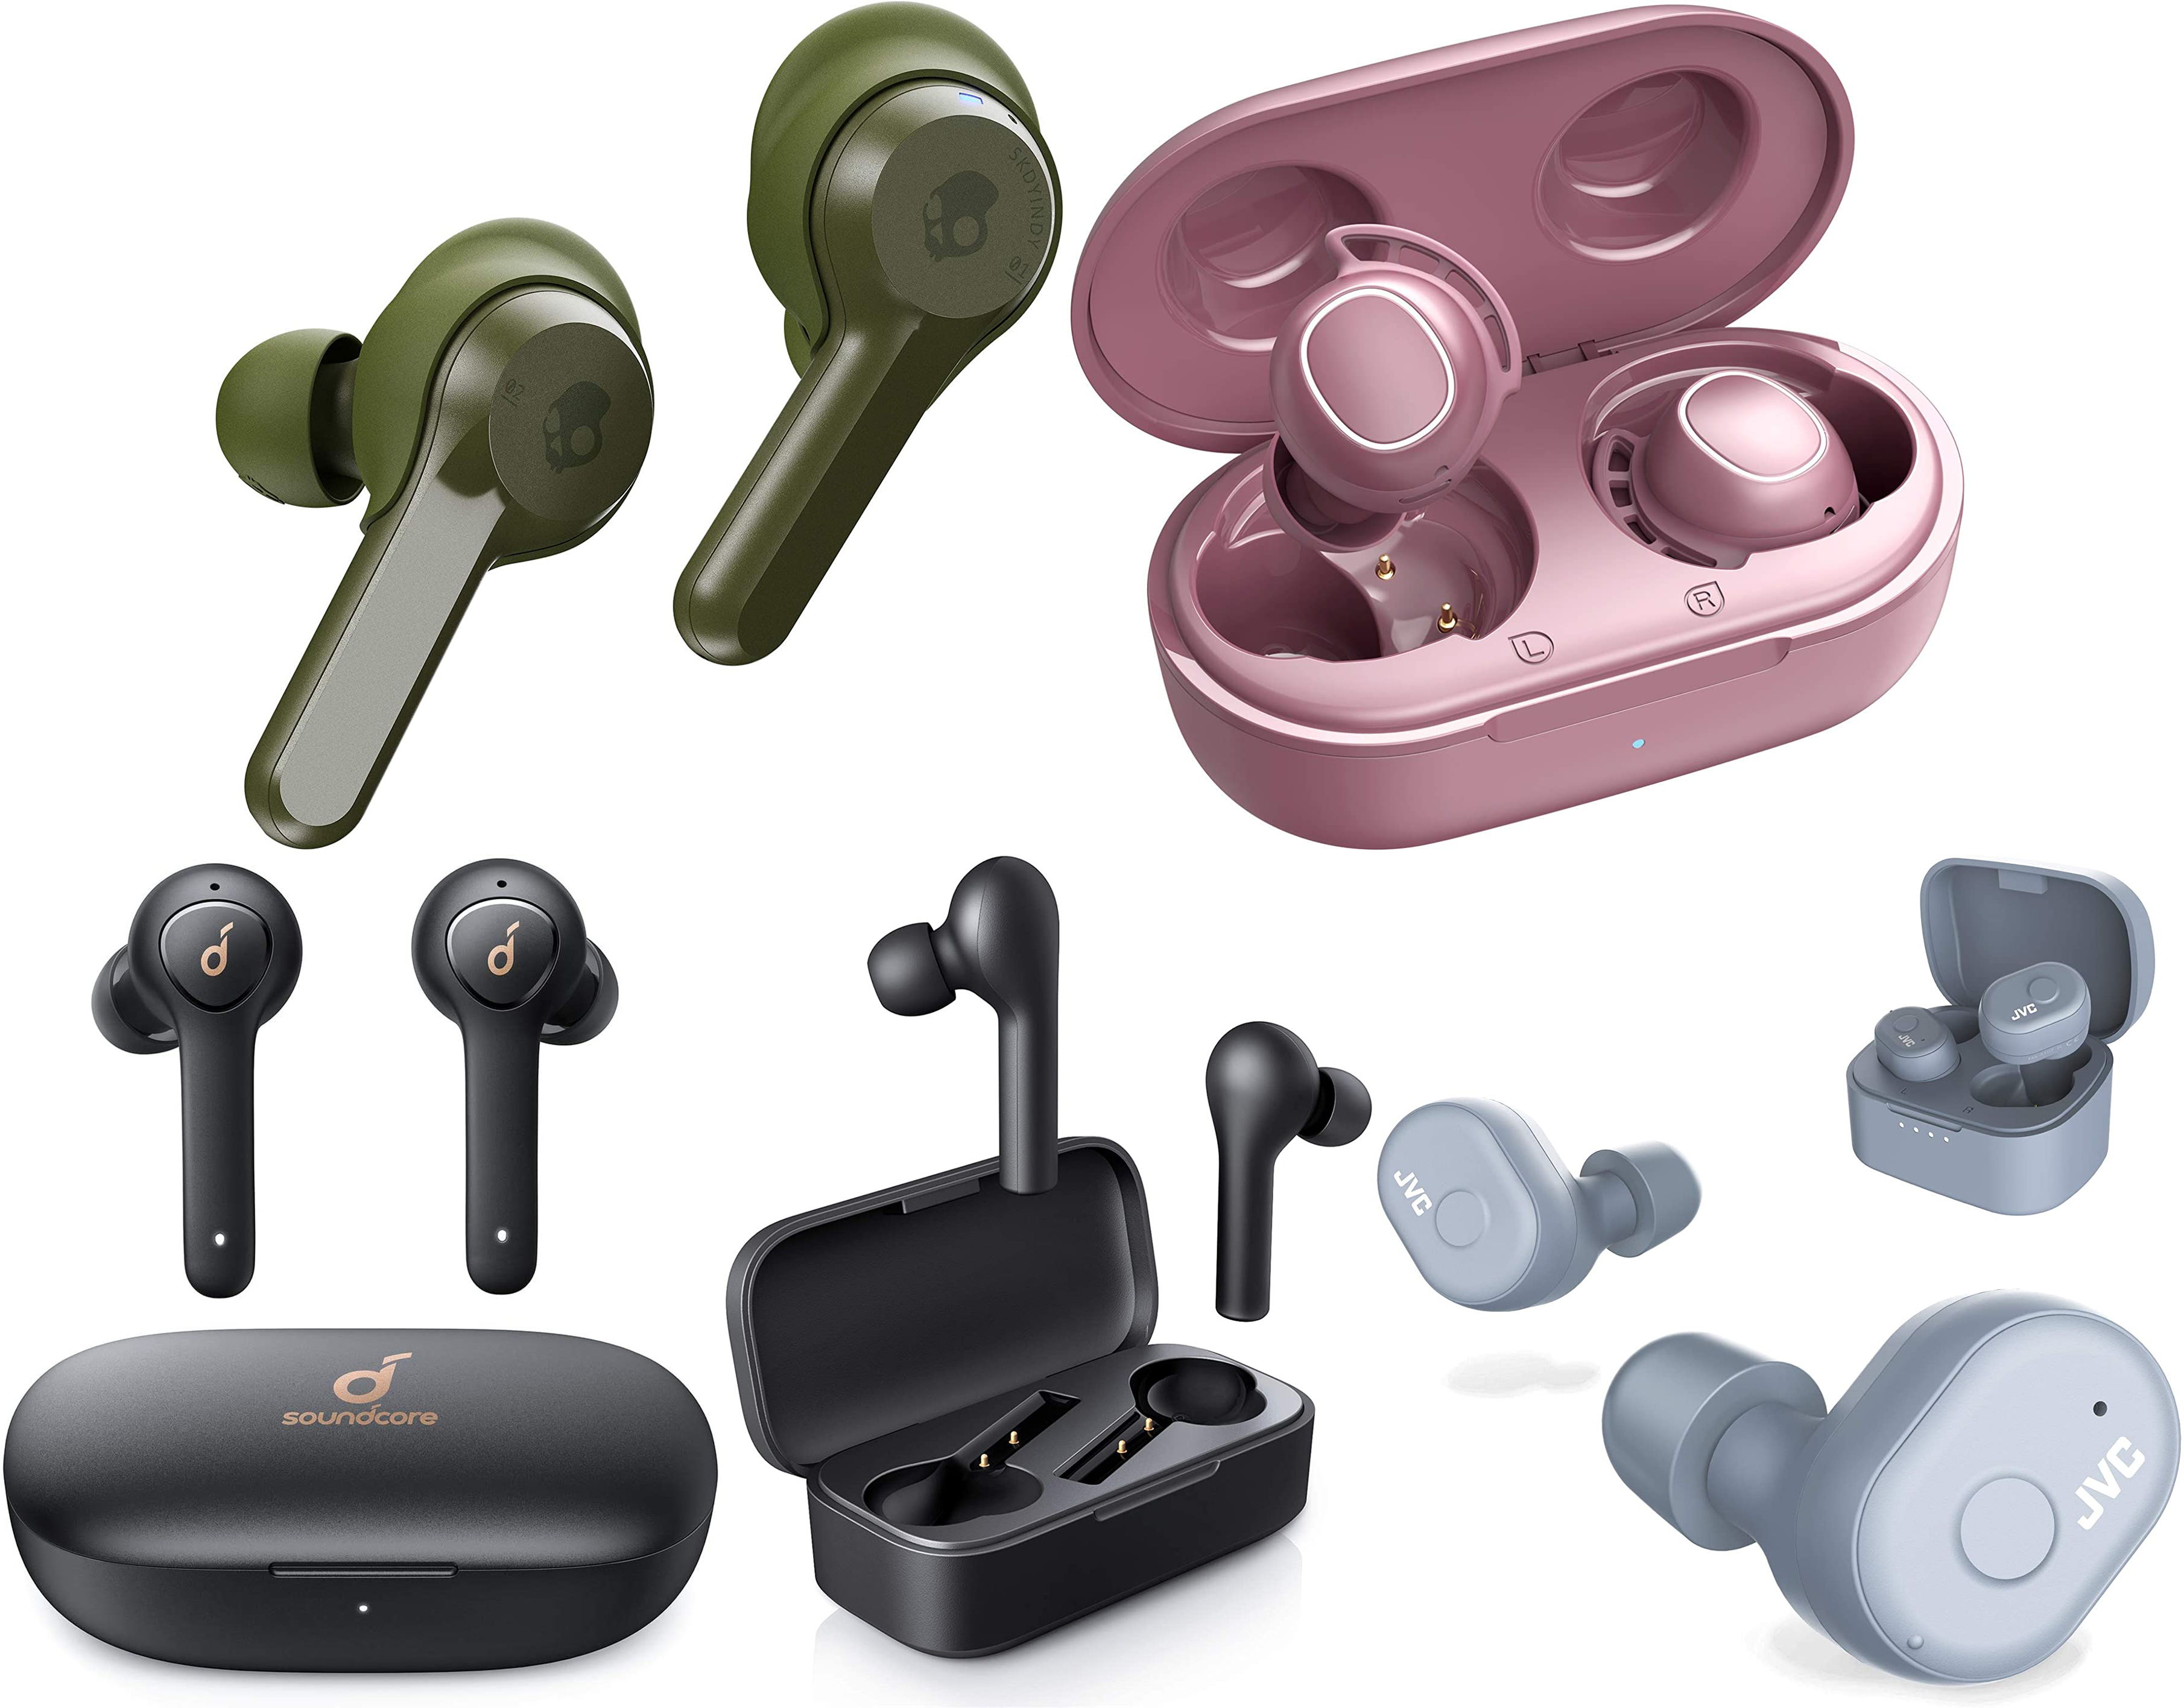 Top 5 truly wireless earbuds under $50 2020